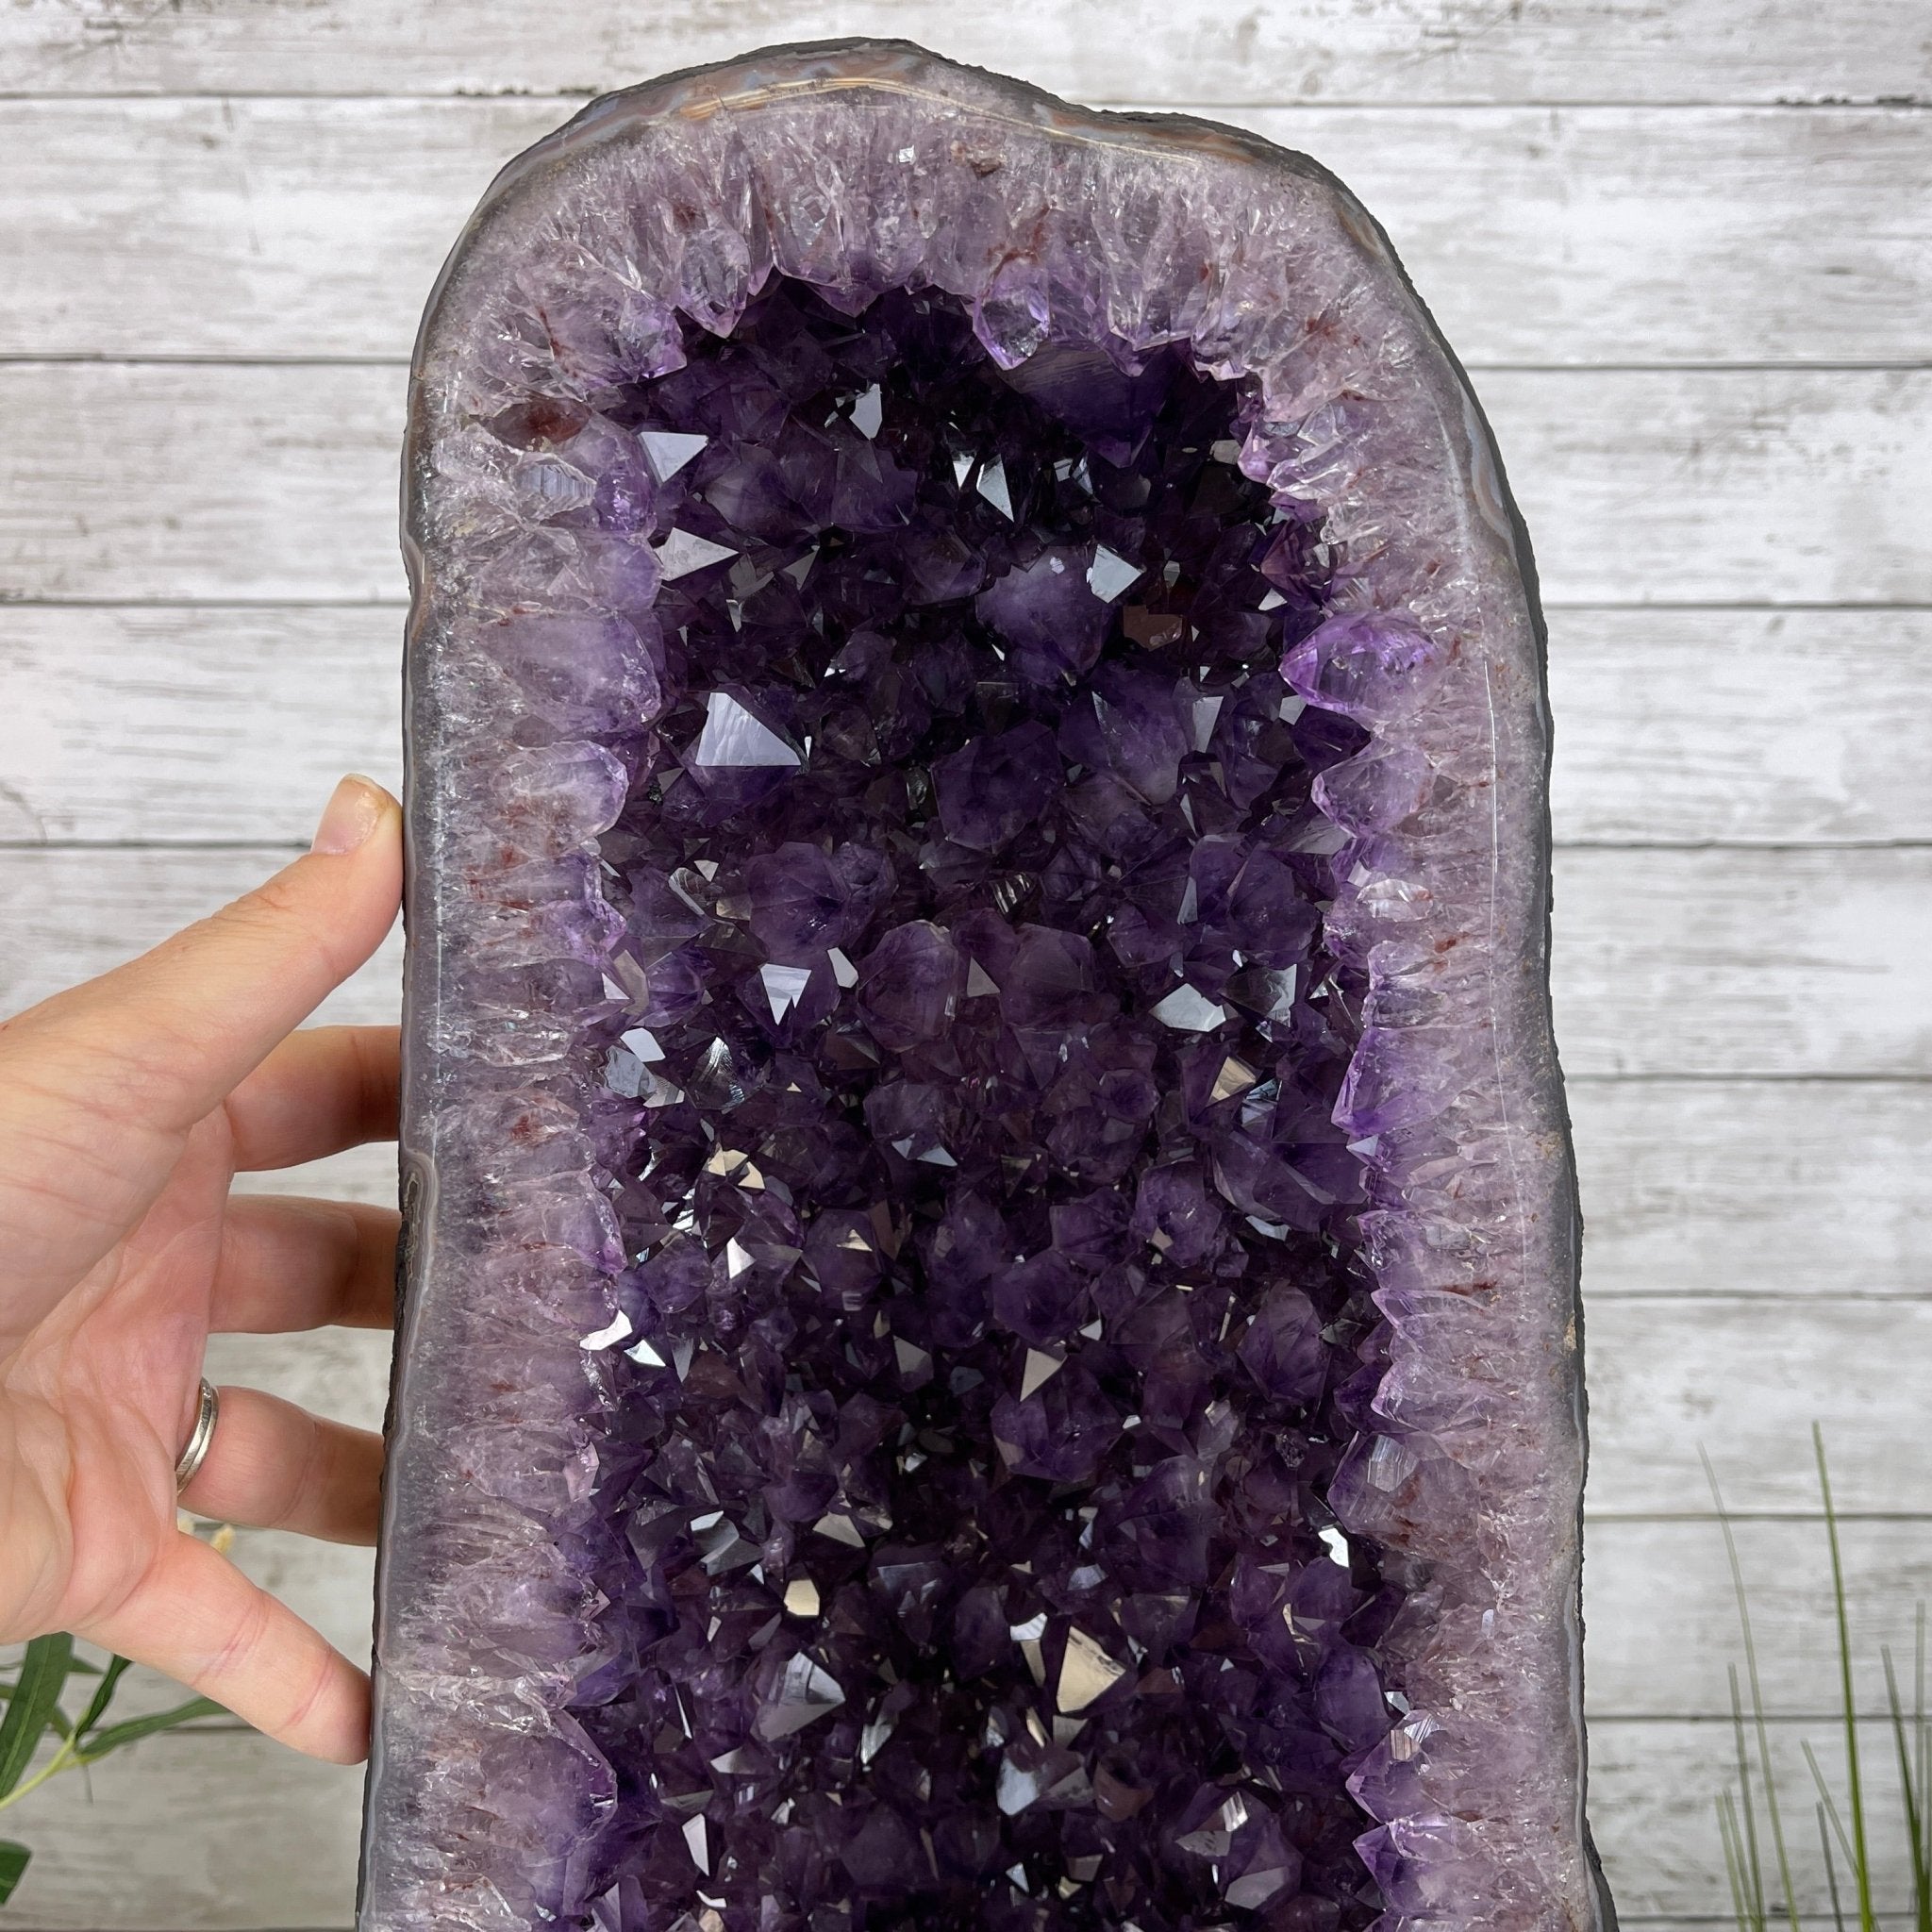 Extra Quality Brazilian Amethyst Cathedral, 23.9” tall & 72.2 lbs #5601-0538 by Brazil Gems - Brazil GemsBrazil GemsExtra Quality Brazilian Amethyst Cathedral, 23.9” tall & 72.2 lbs #5601-0538 by Brazil GemsCathedrals5601-0538